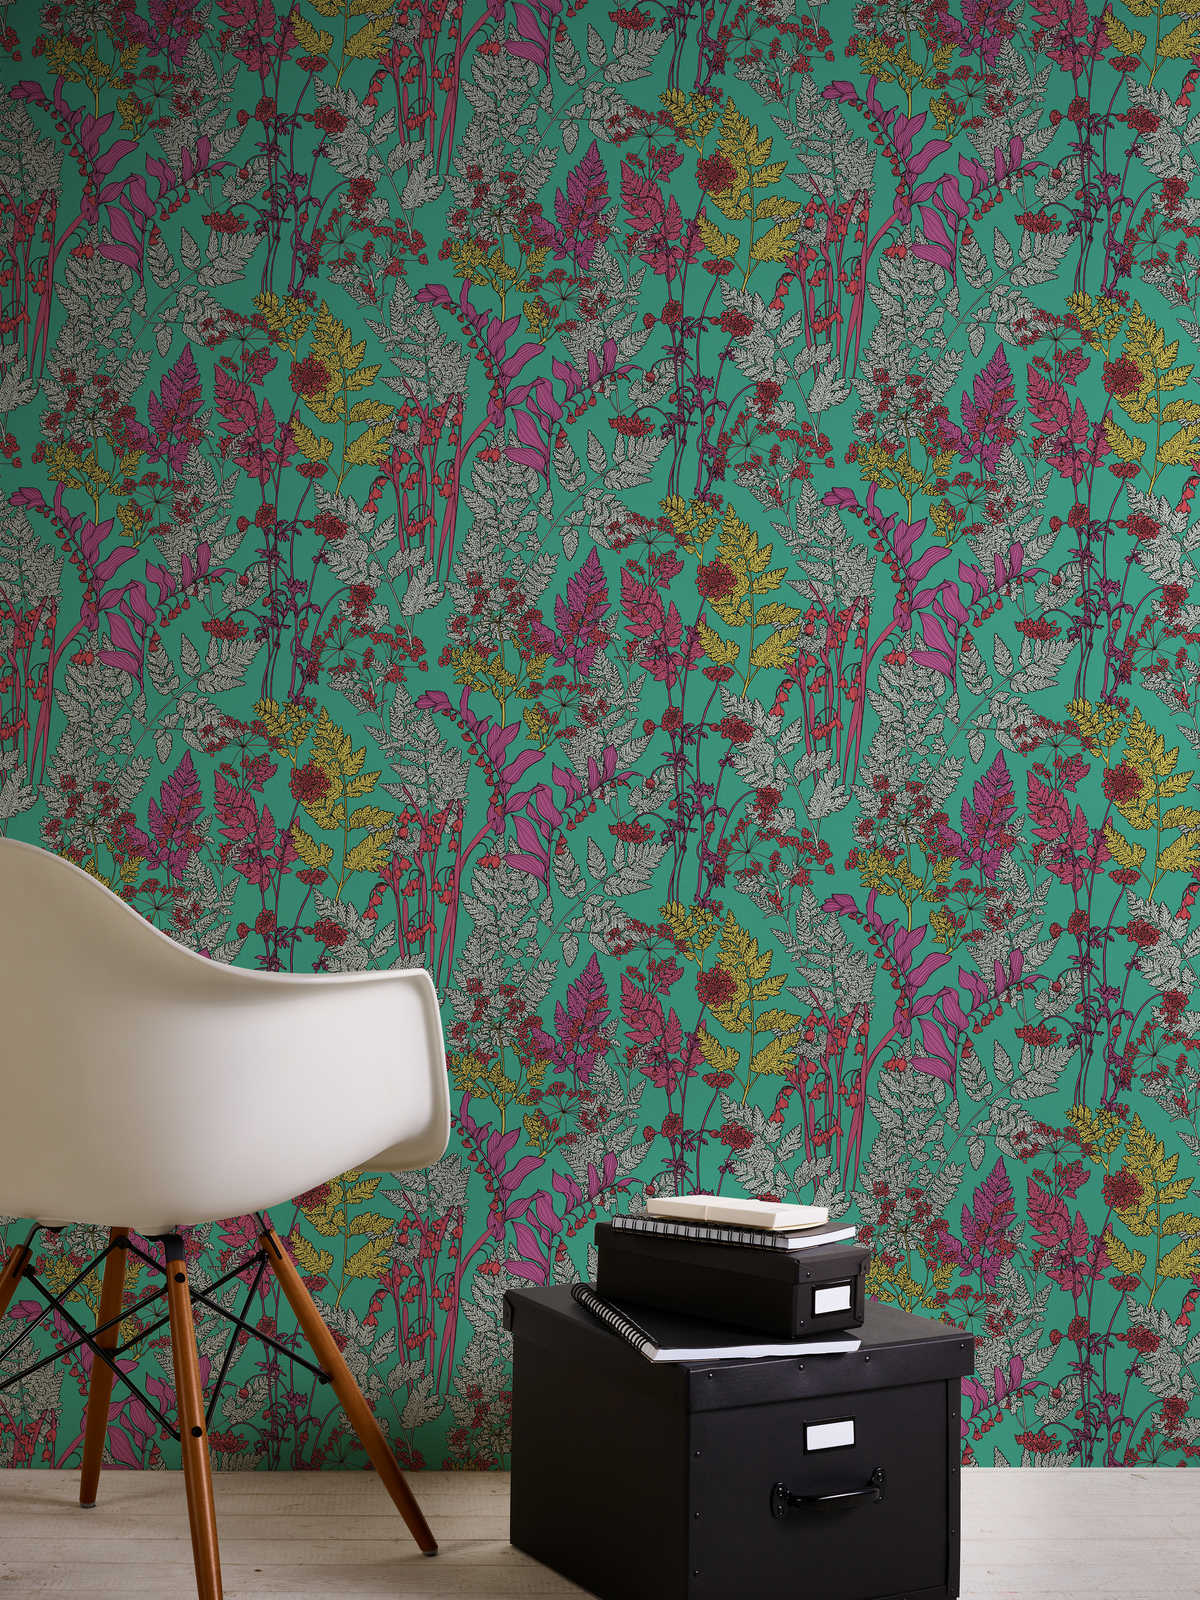             Green non-woven wallpaper colourful leaves pattern in drawing style - green, purple, grey
        